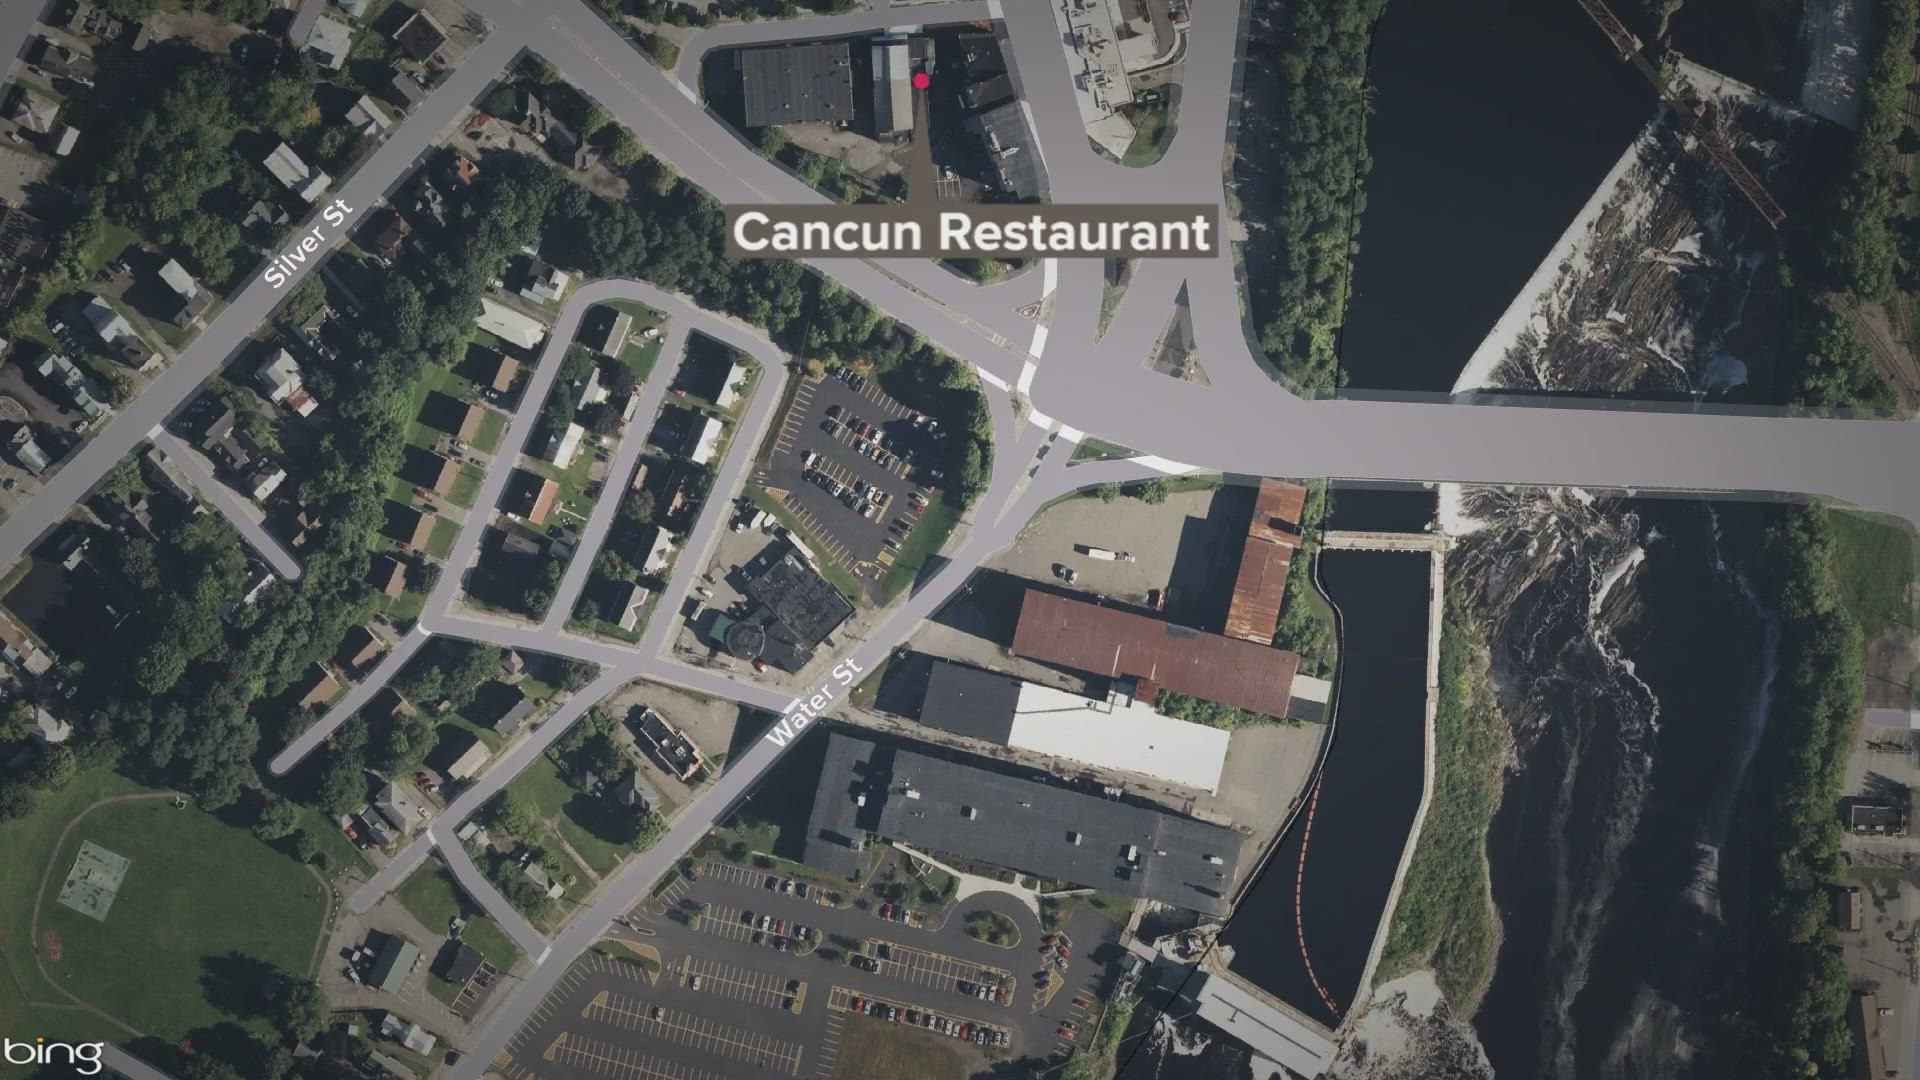 While investigating the shooting incident, fights broke out in front of the Cancun Restaurant on Silver Street Extension, police said.